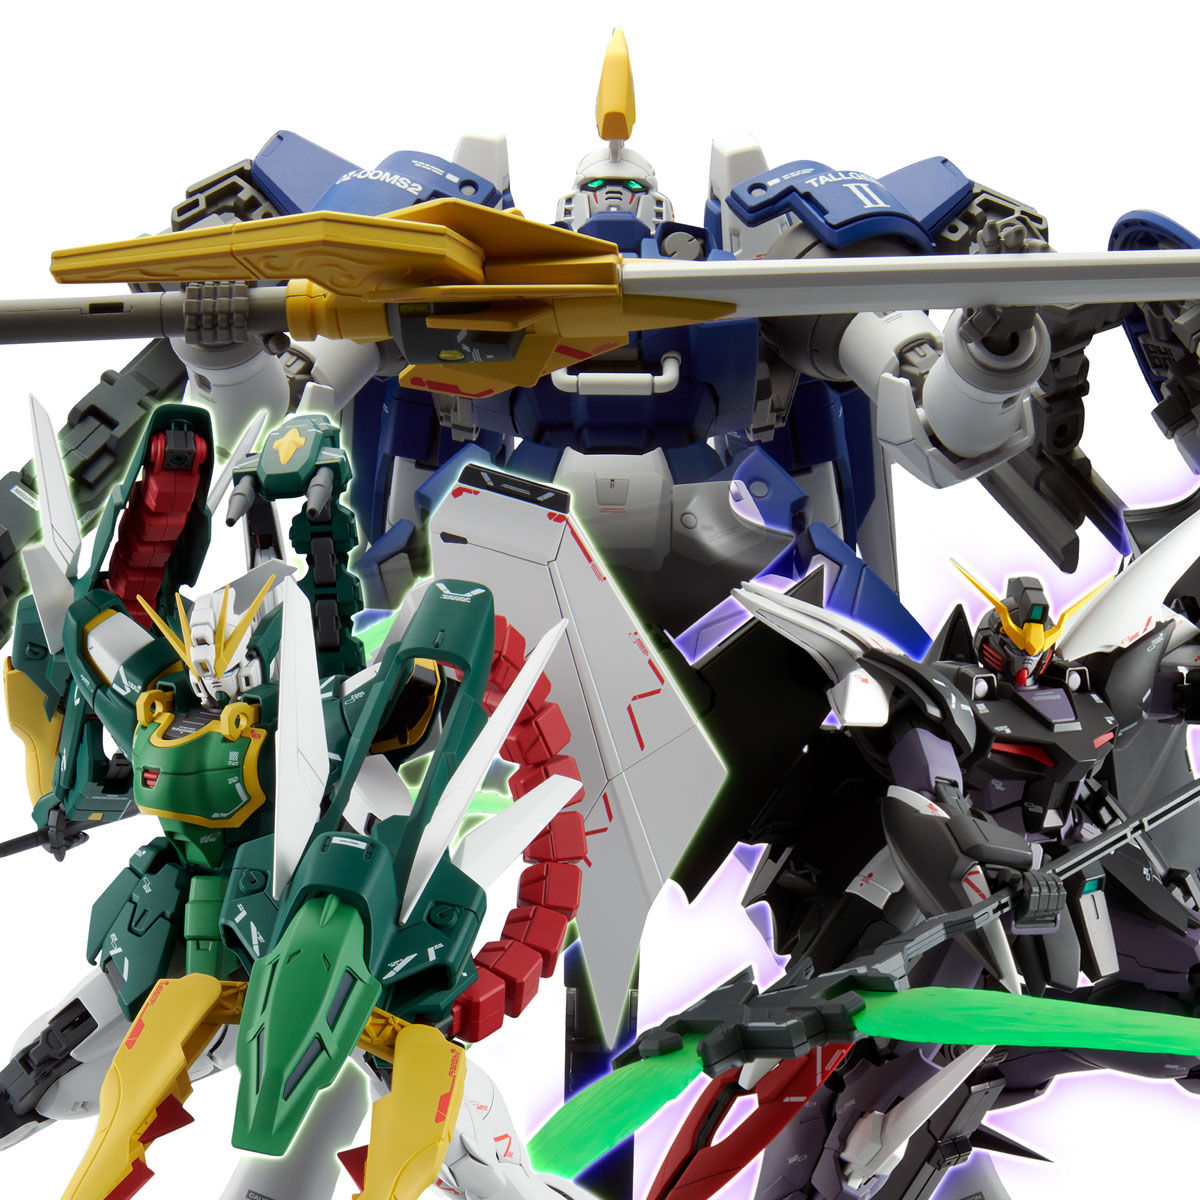 MG 1/100 EXPANSION PARTS SET for MOBILE SUIT GUNDAM W EW SERIES (The Glory of Losers Ver.) [Aug 2021 Delivery]